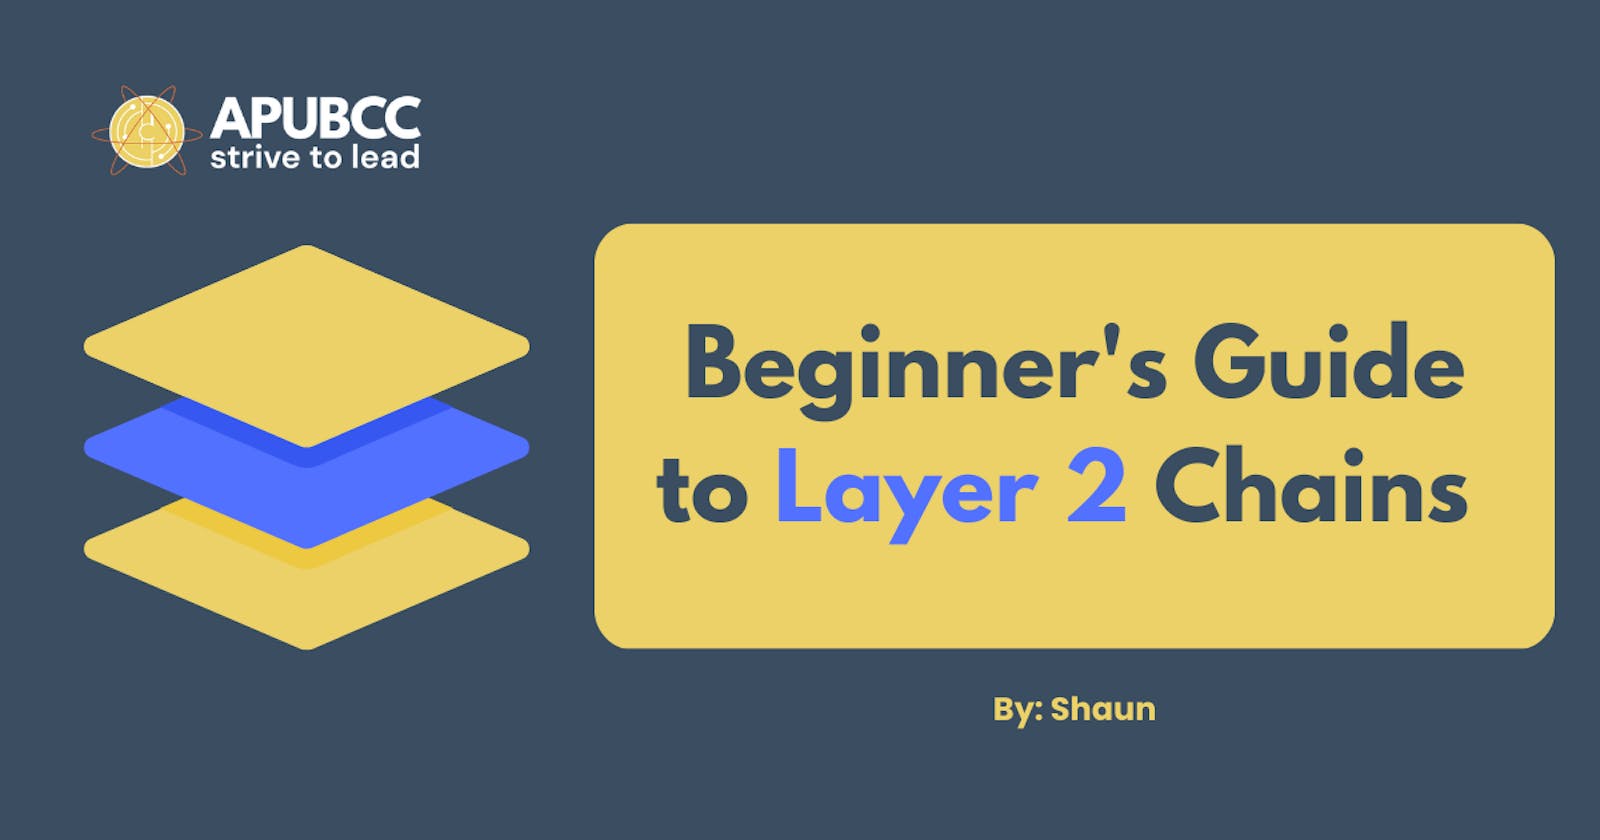 Beginner's Guide to Layer 2 Chains